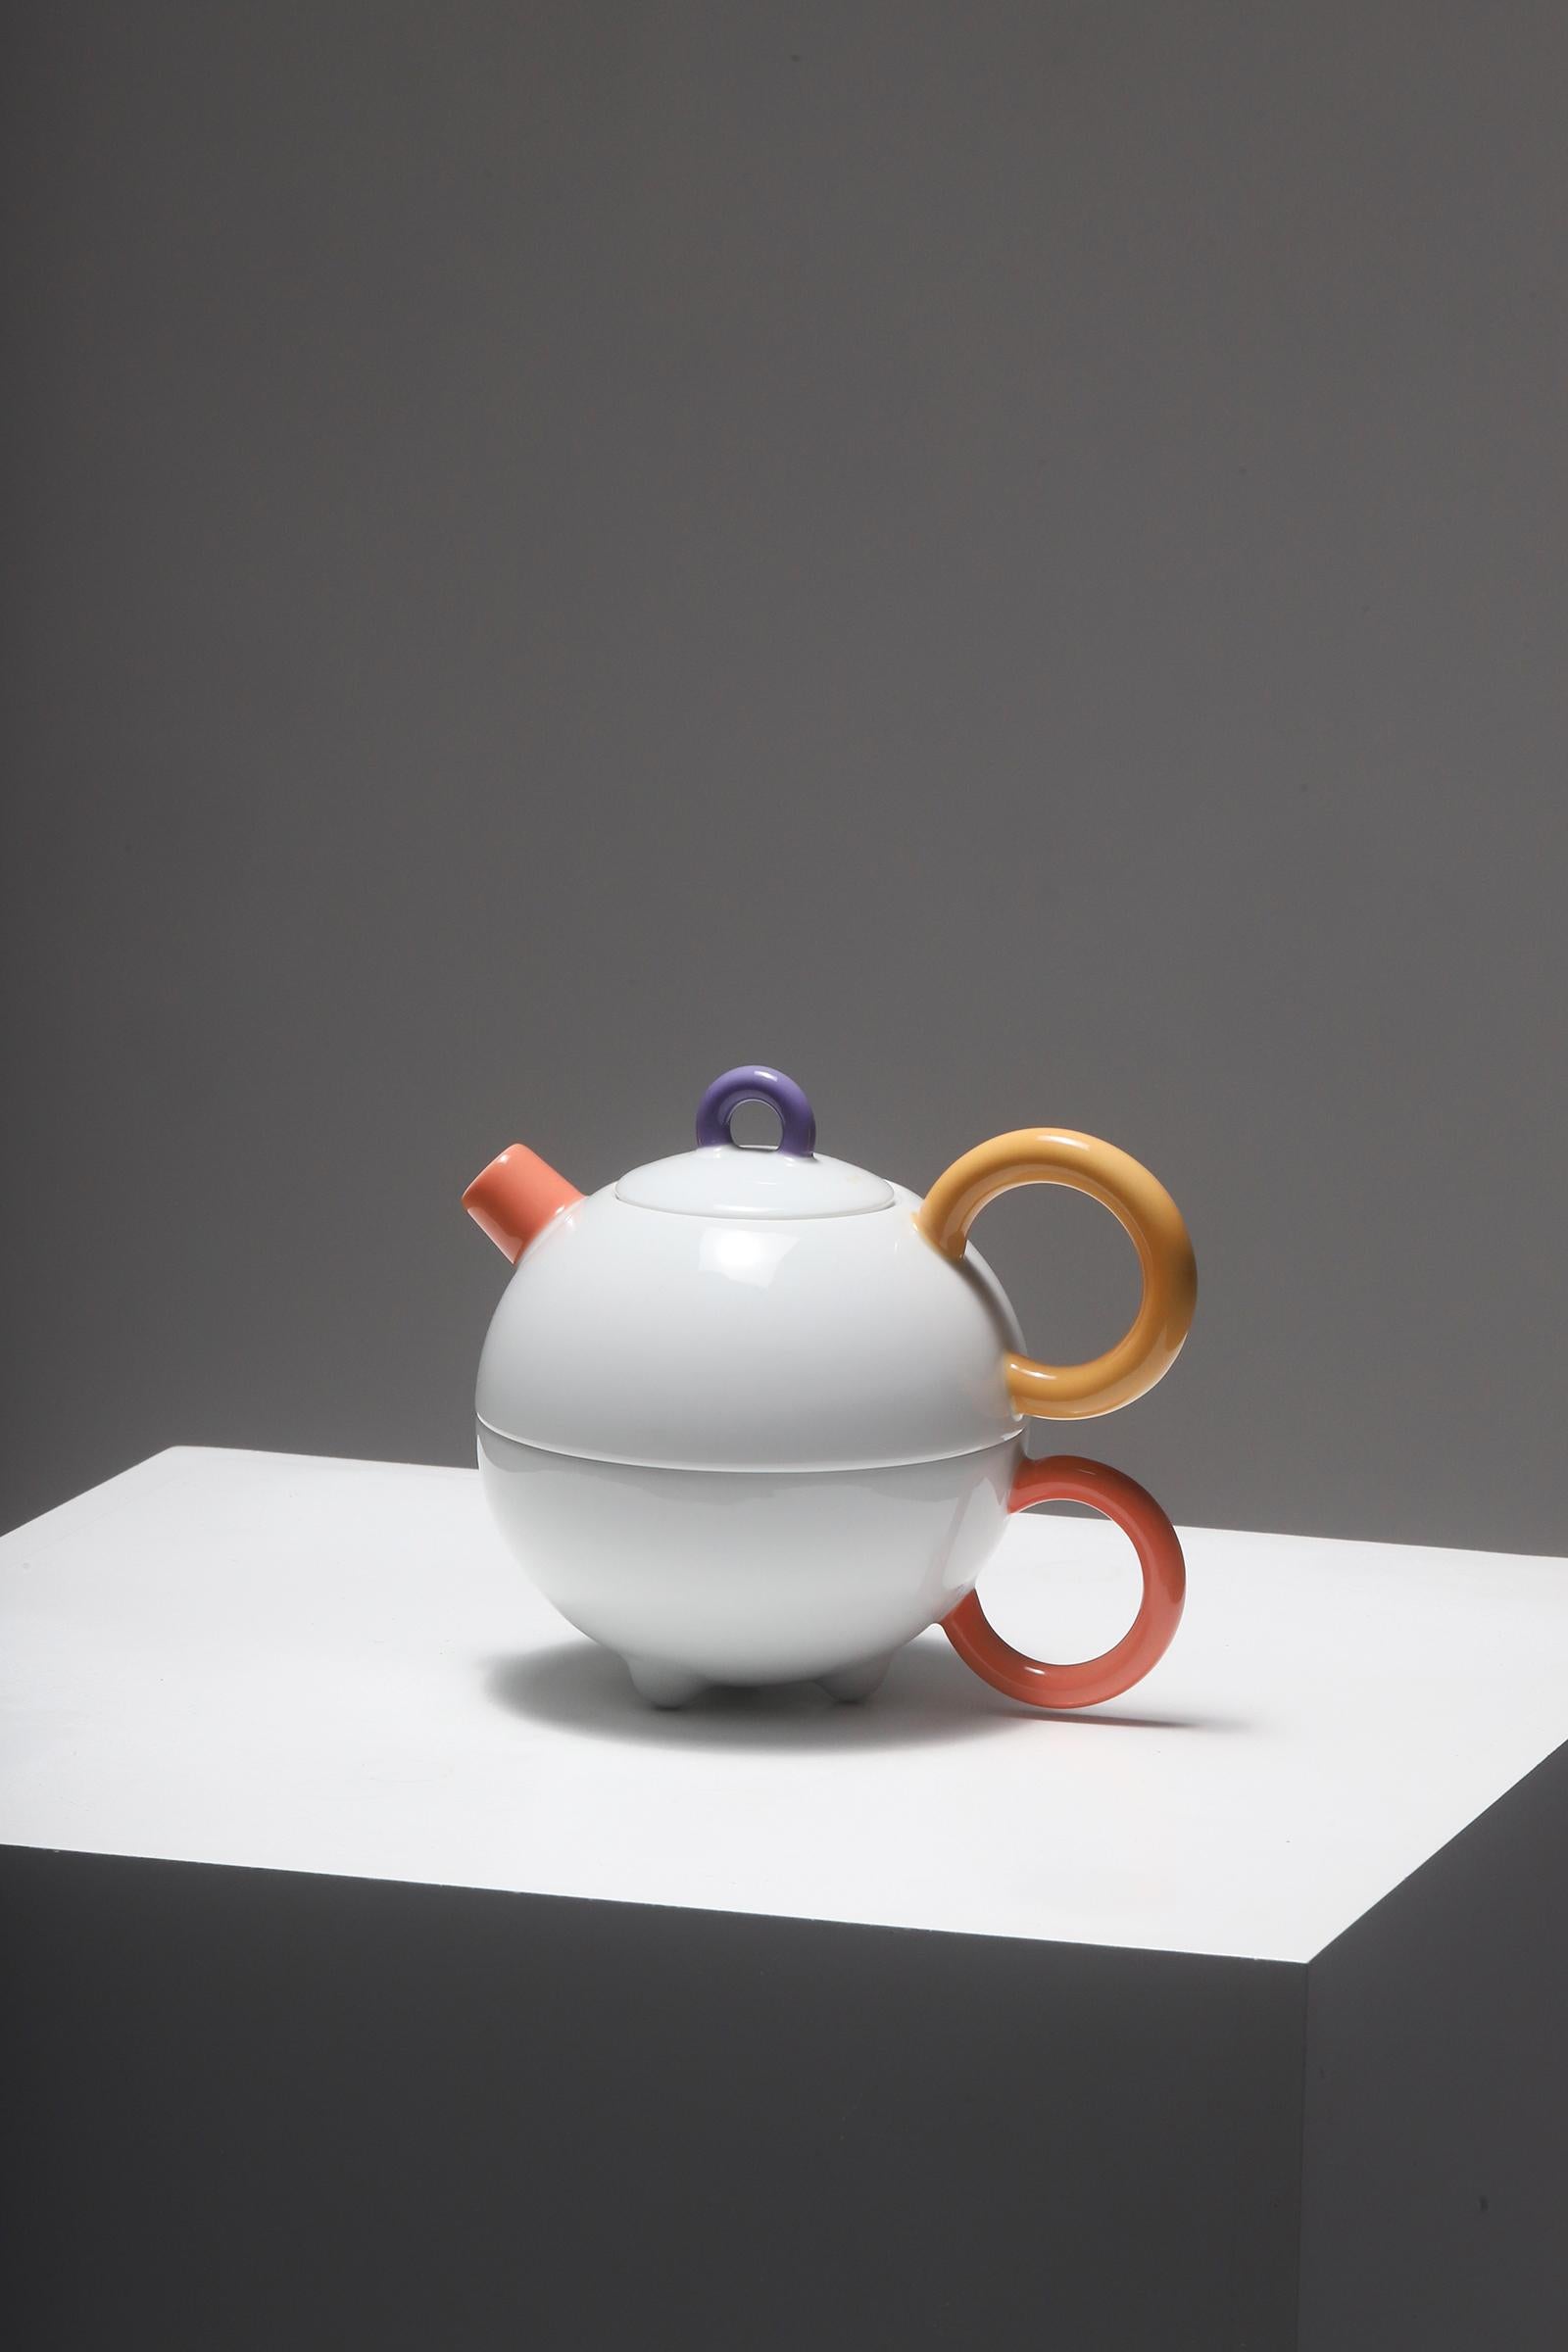 Matteo Thun was one of the co-founders of the Memphis group in 1981. He worked together with many different companies such as Bieffeplast, Swatch and Tiffany. This porcelain tea for one pot he designed for Arzberg, Germany in the 1980s. Thun